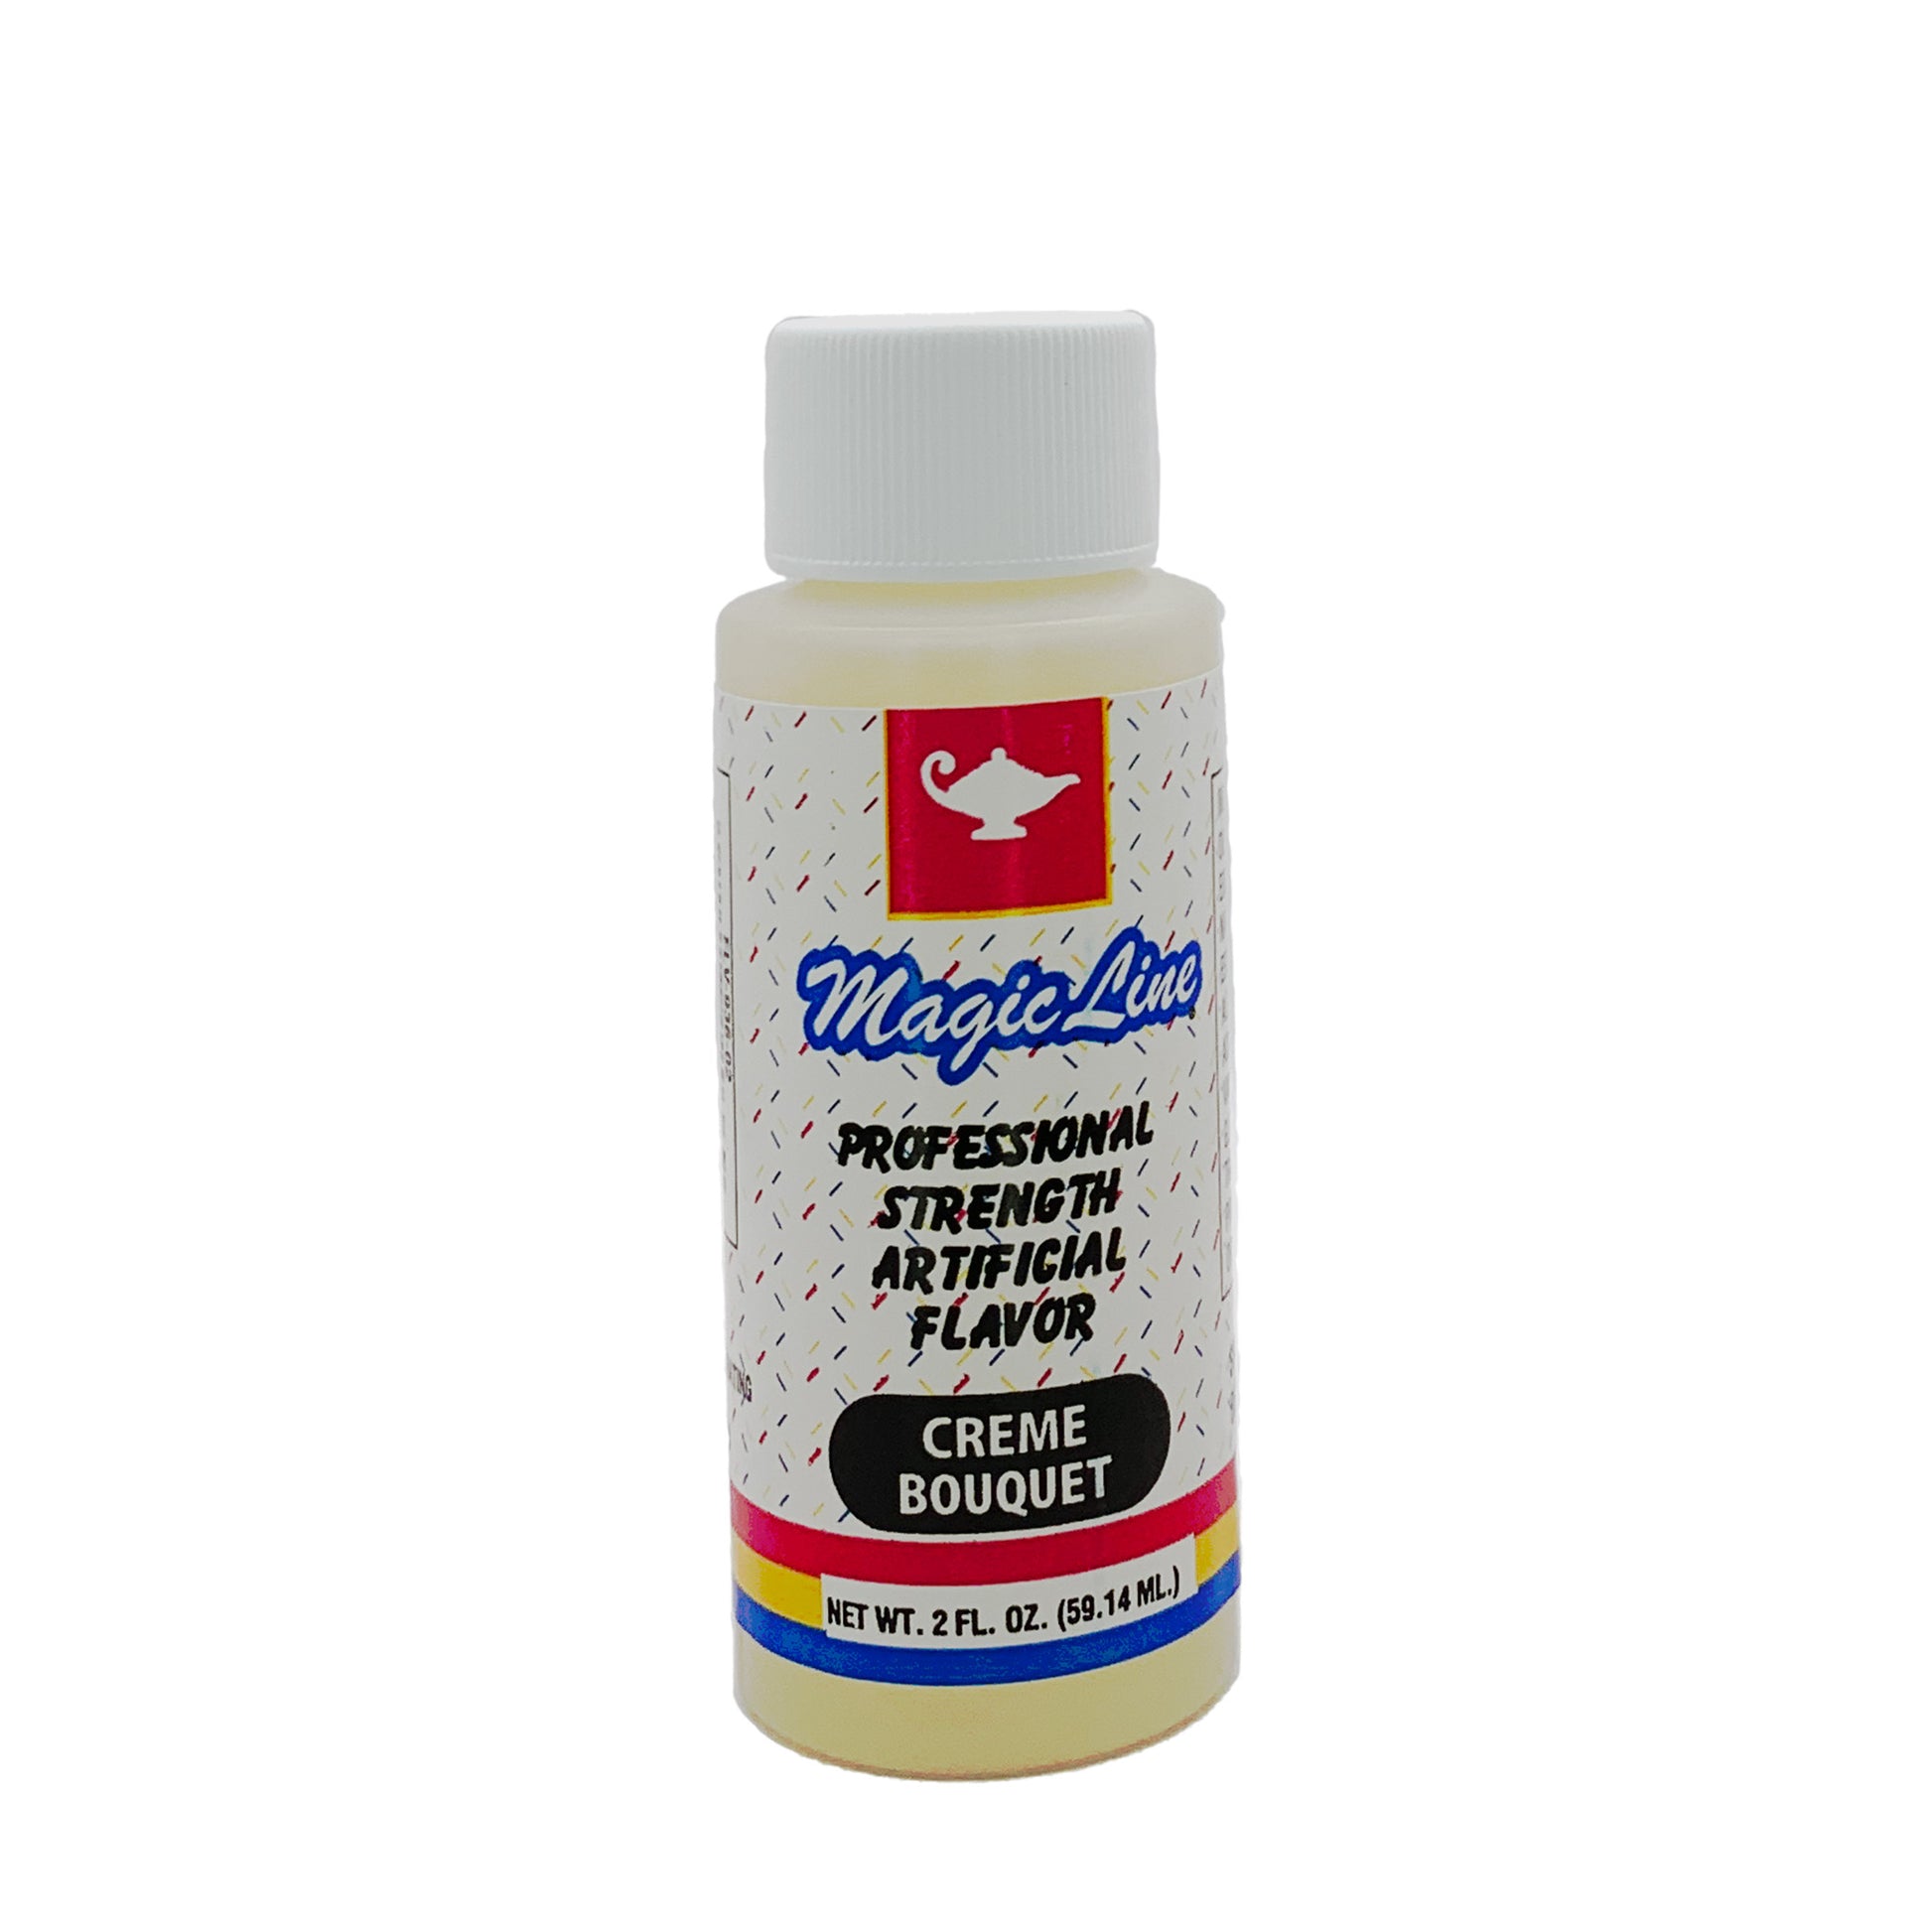 Magic Line Creme Bouquet artificial flavoring in a small 2 fl. oz bottle. The label is white with multicolored stripes at the bottom and features a red logo with a white teapot.